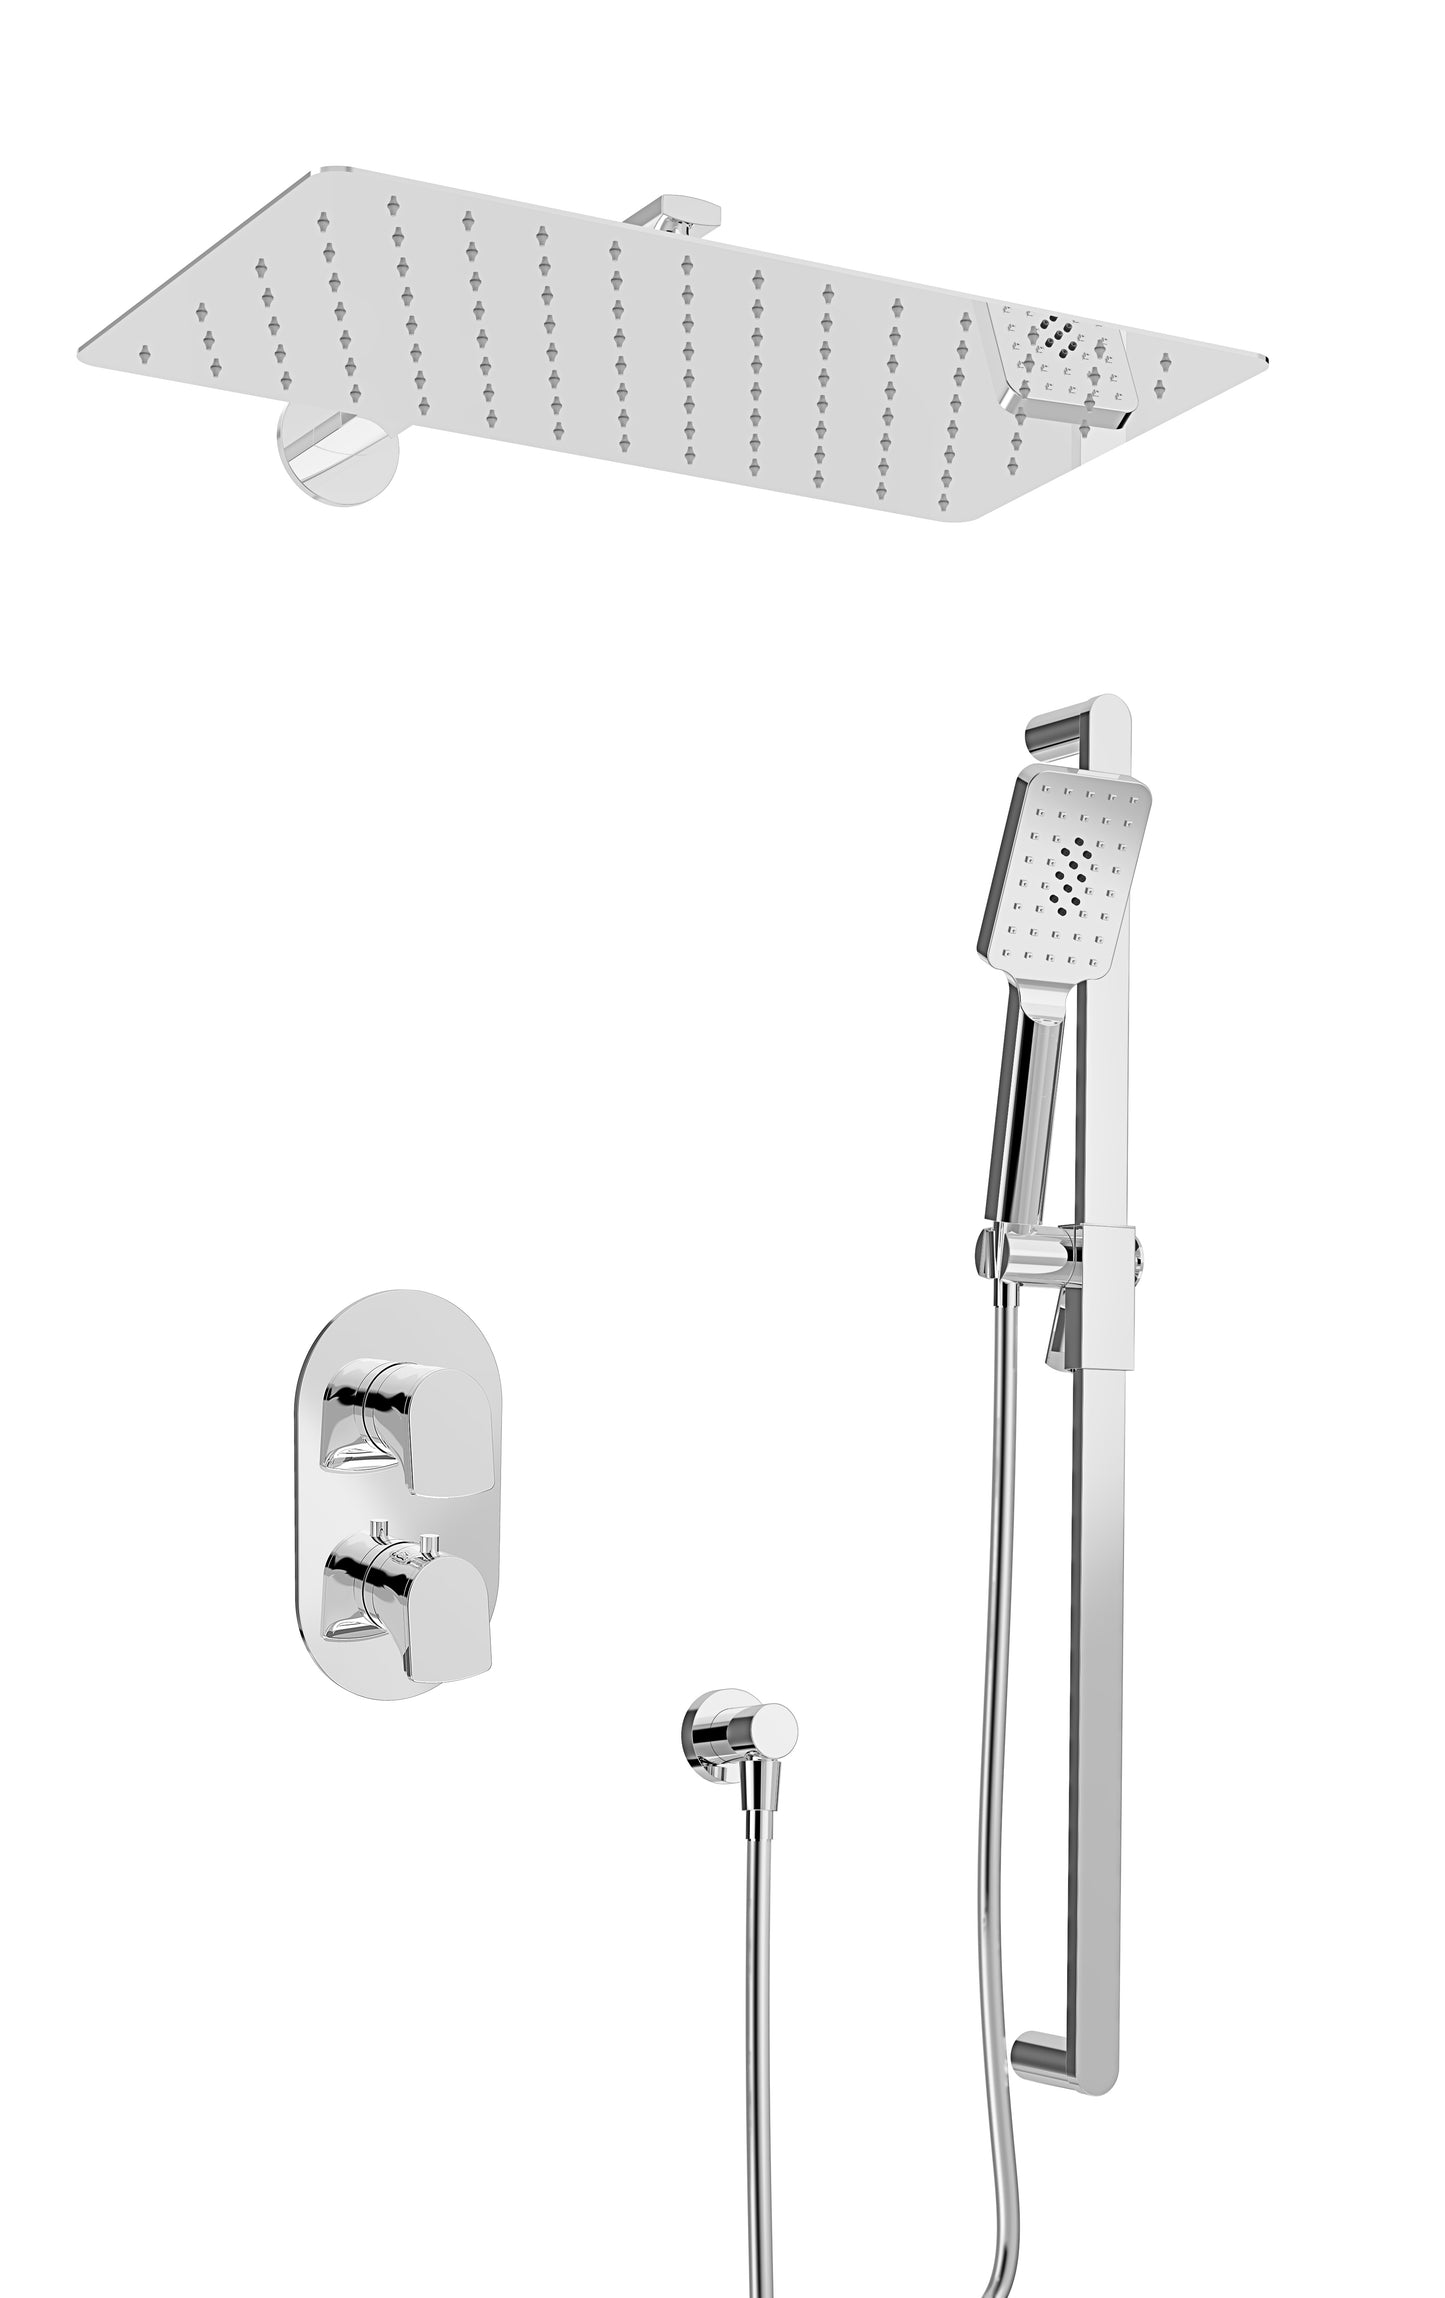 Baril Complete Thermostatic Pressure Balanced Shower Kit (ACCENT B56 4236)